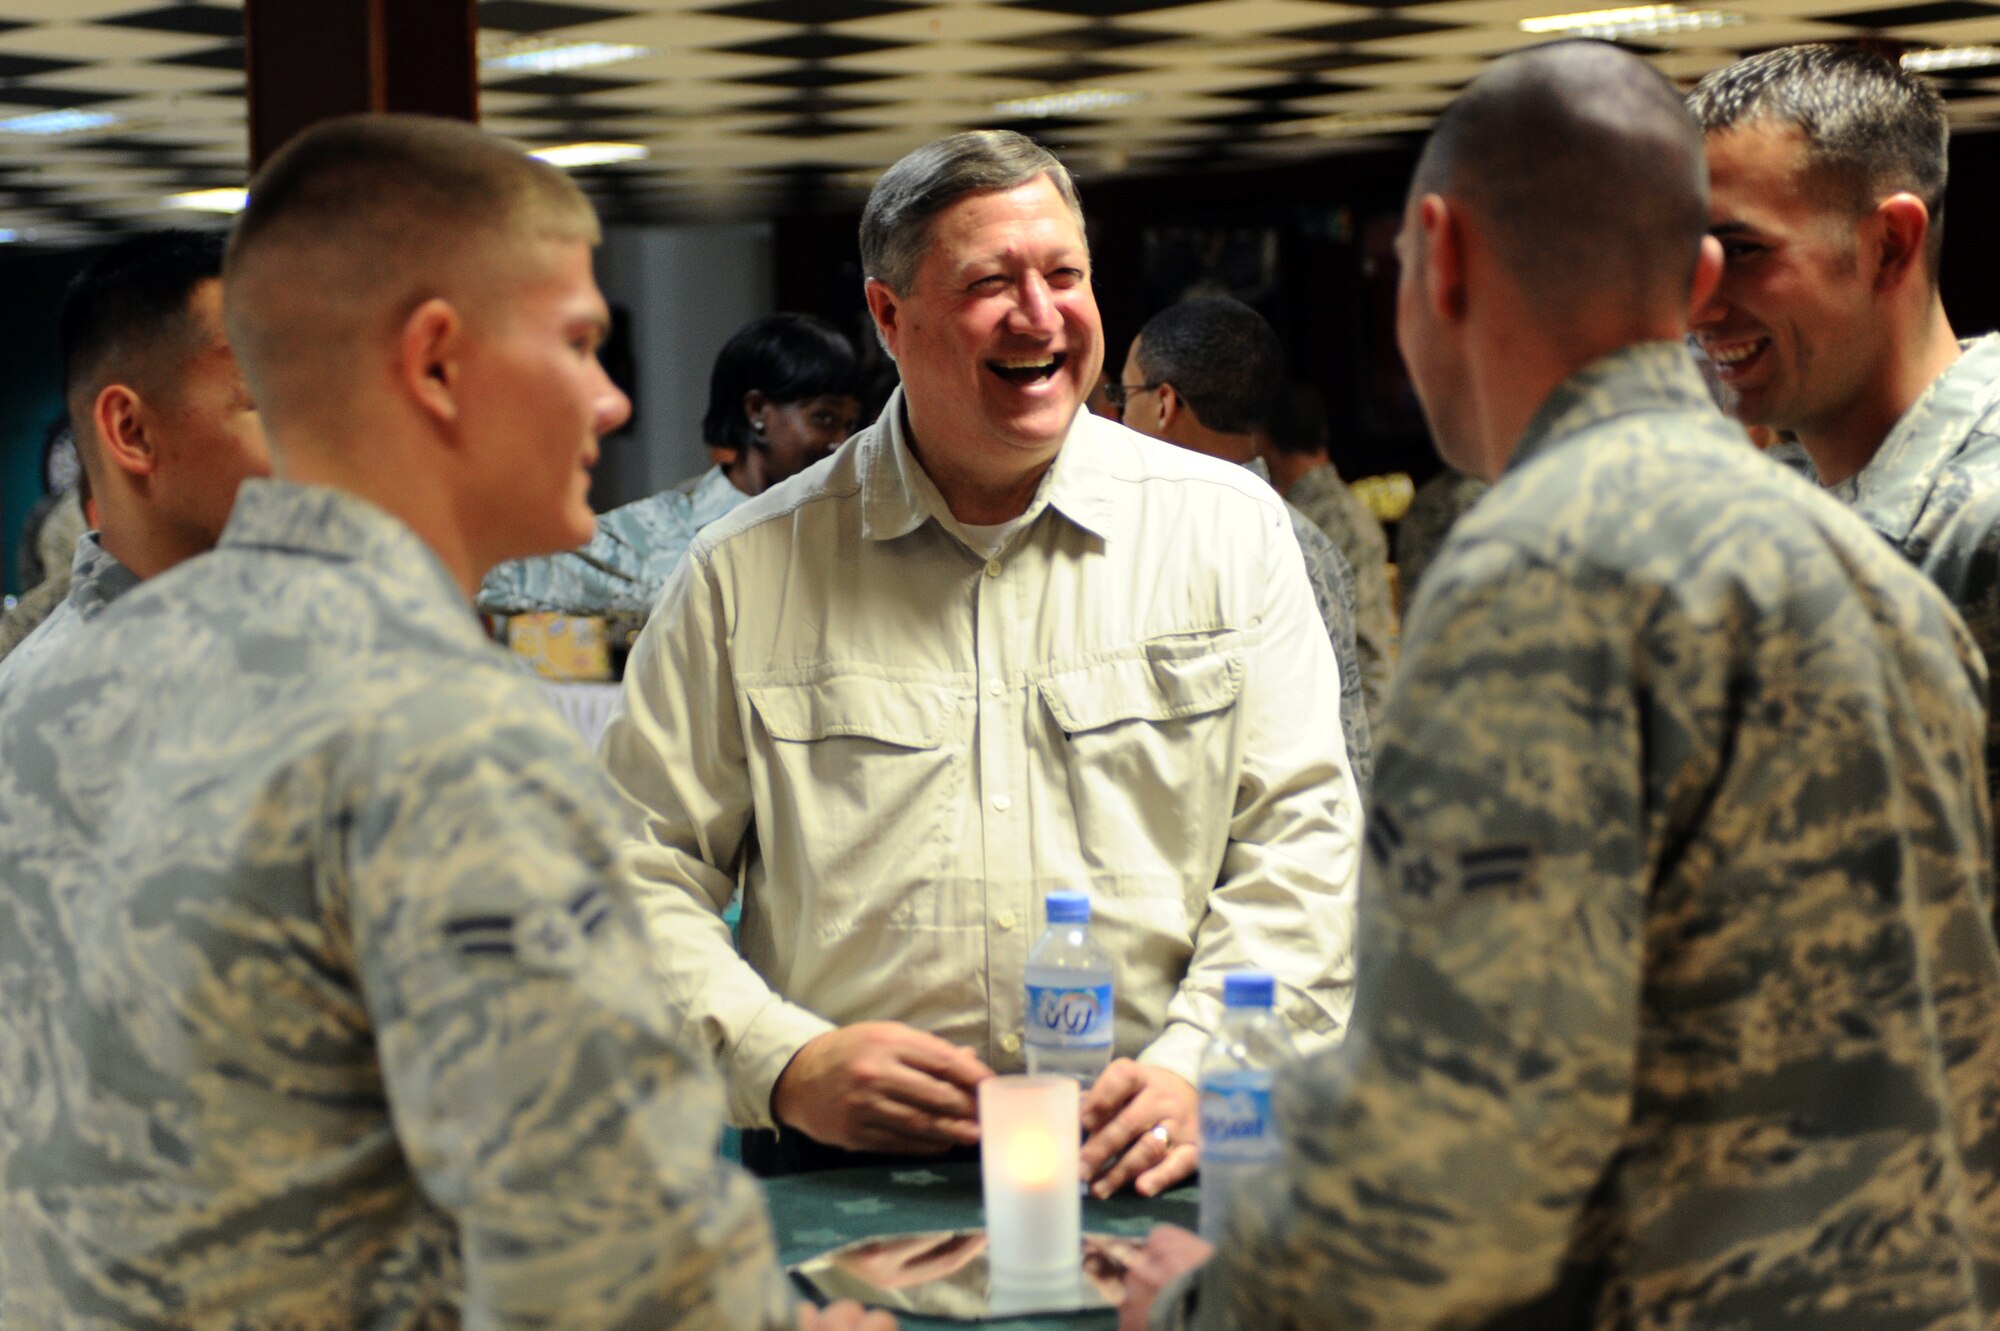 Secretary of the Air Force Michael Donley socializes with 379th Air Expeditionary Wing Airmen during his visit Jan. 29, 2010, to a deployed location in Southwest Asia. (U.S. Air Force photo/Senior Airman Kasey Zickmund)